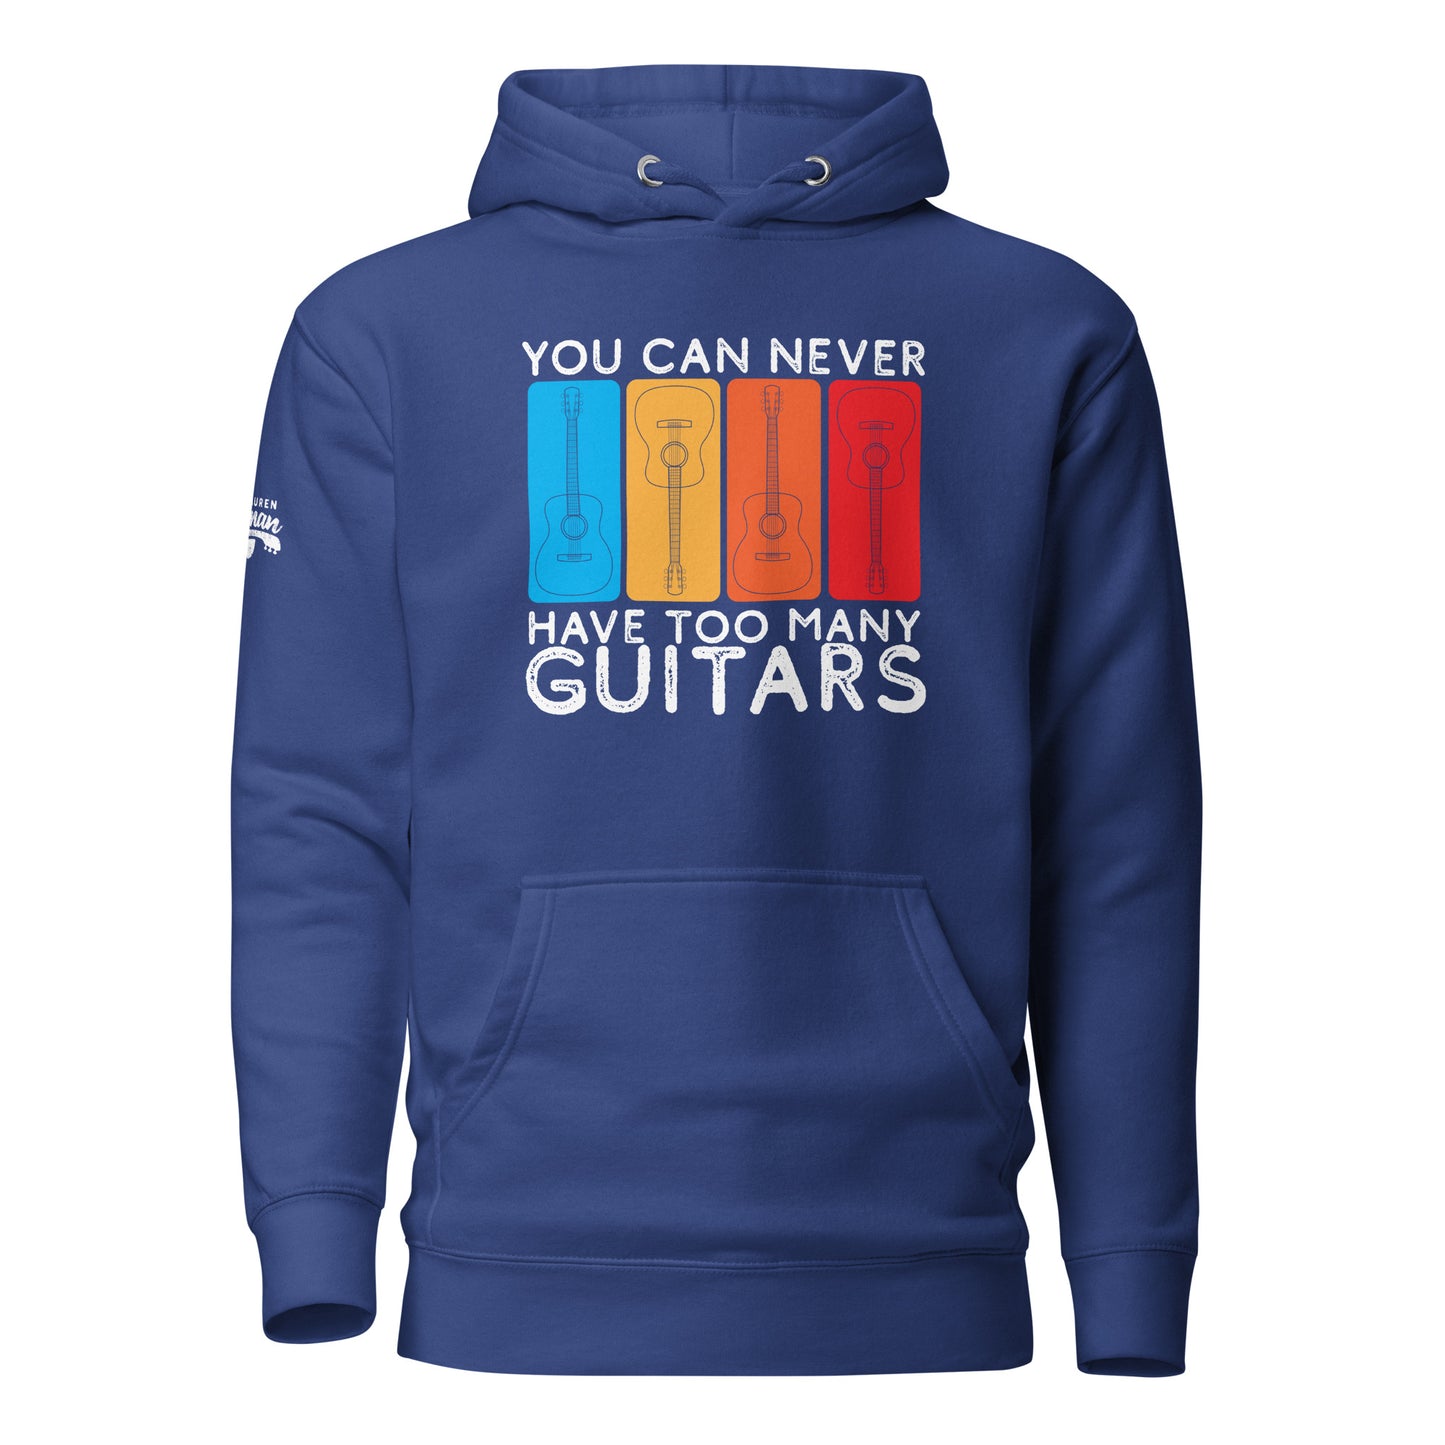 You Can Never Have Too Many Guitars - Unisex Hoodie